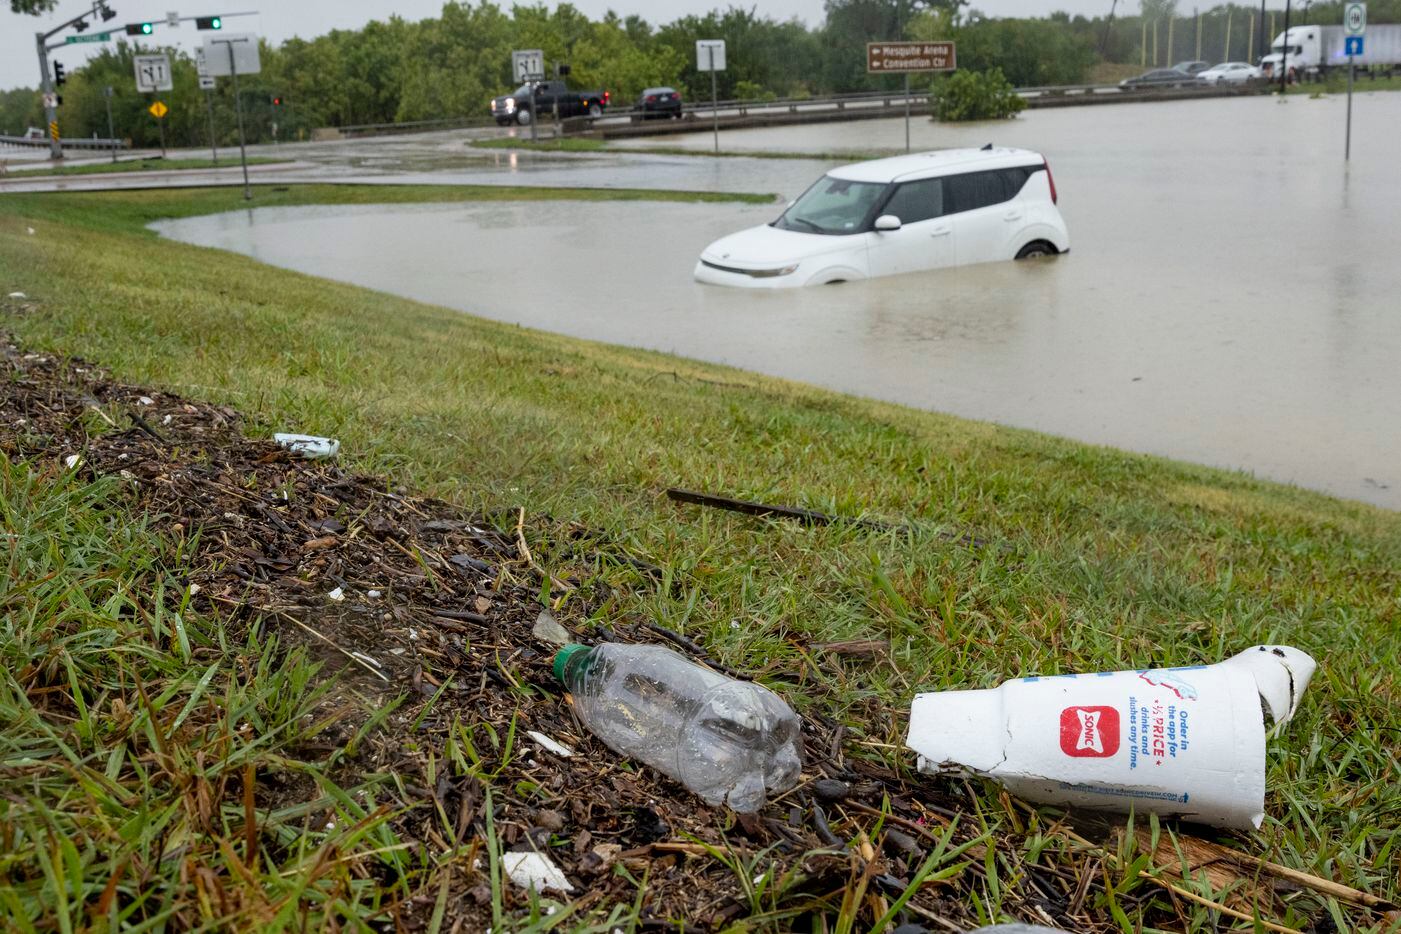 The area where the water line reached can be seen as stalled cars sit abandoned on the...